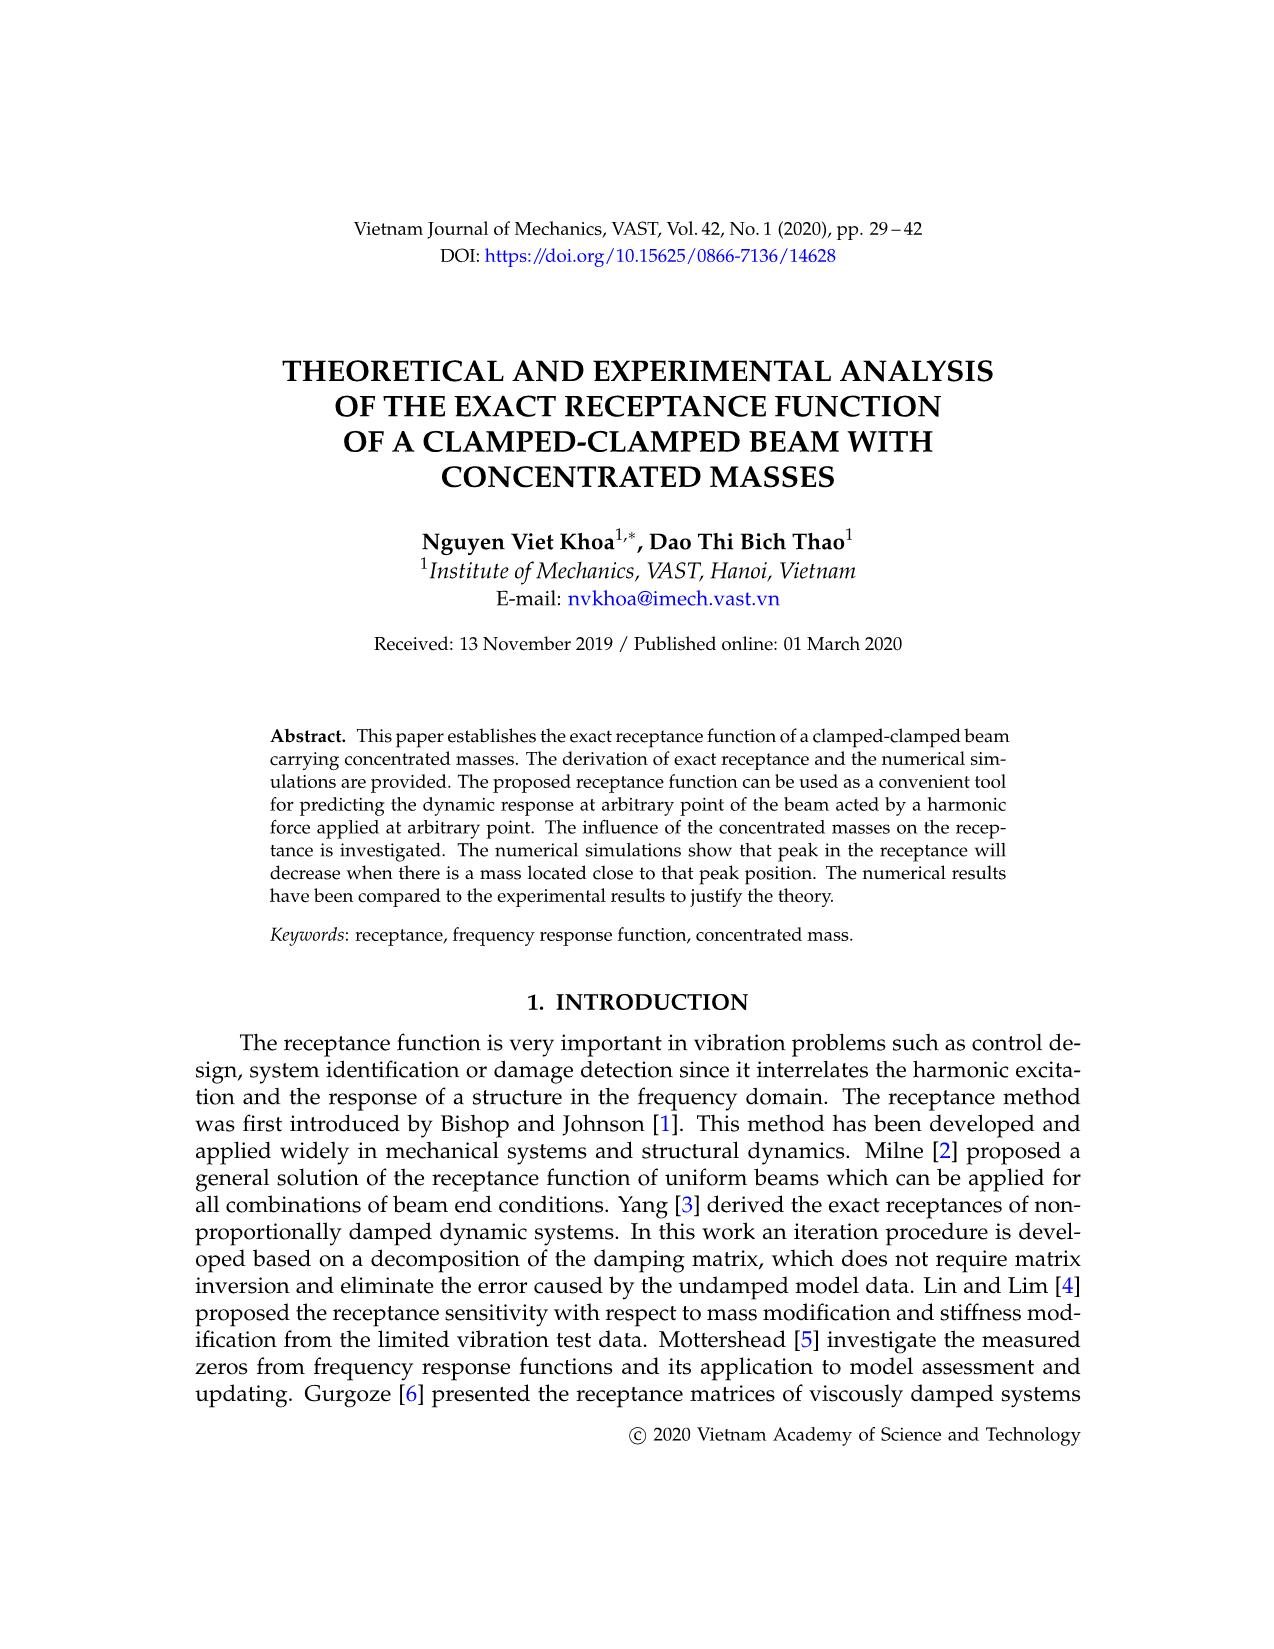 Theoretical and experimental analysis of the exact receptance function of a clamped - Clamped beam with concentrated masses trang 1